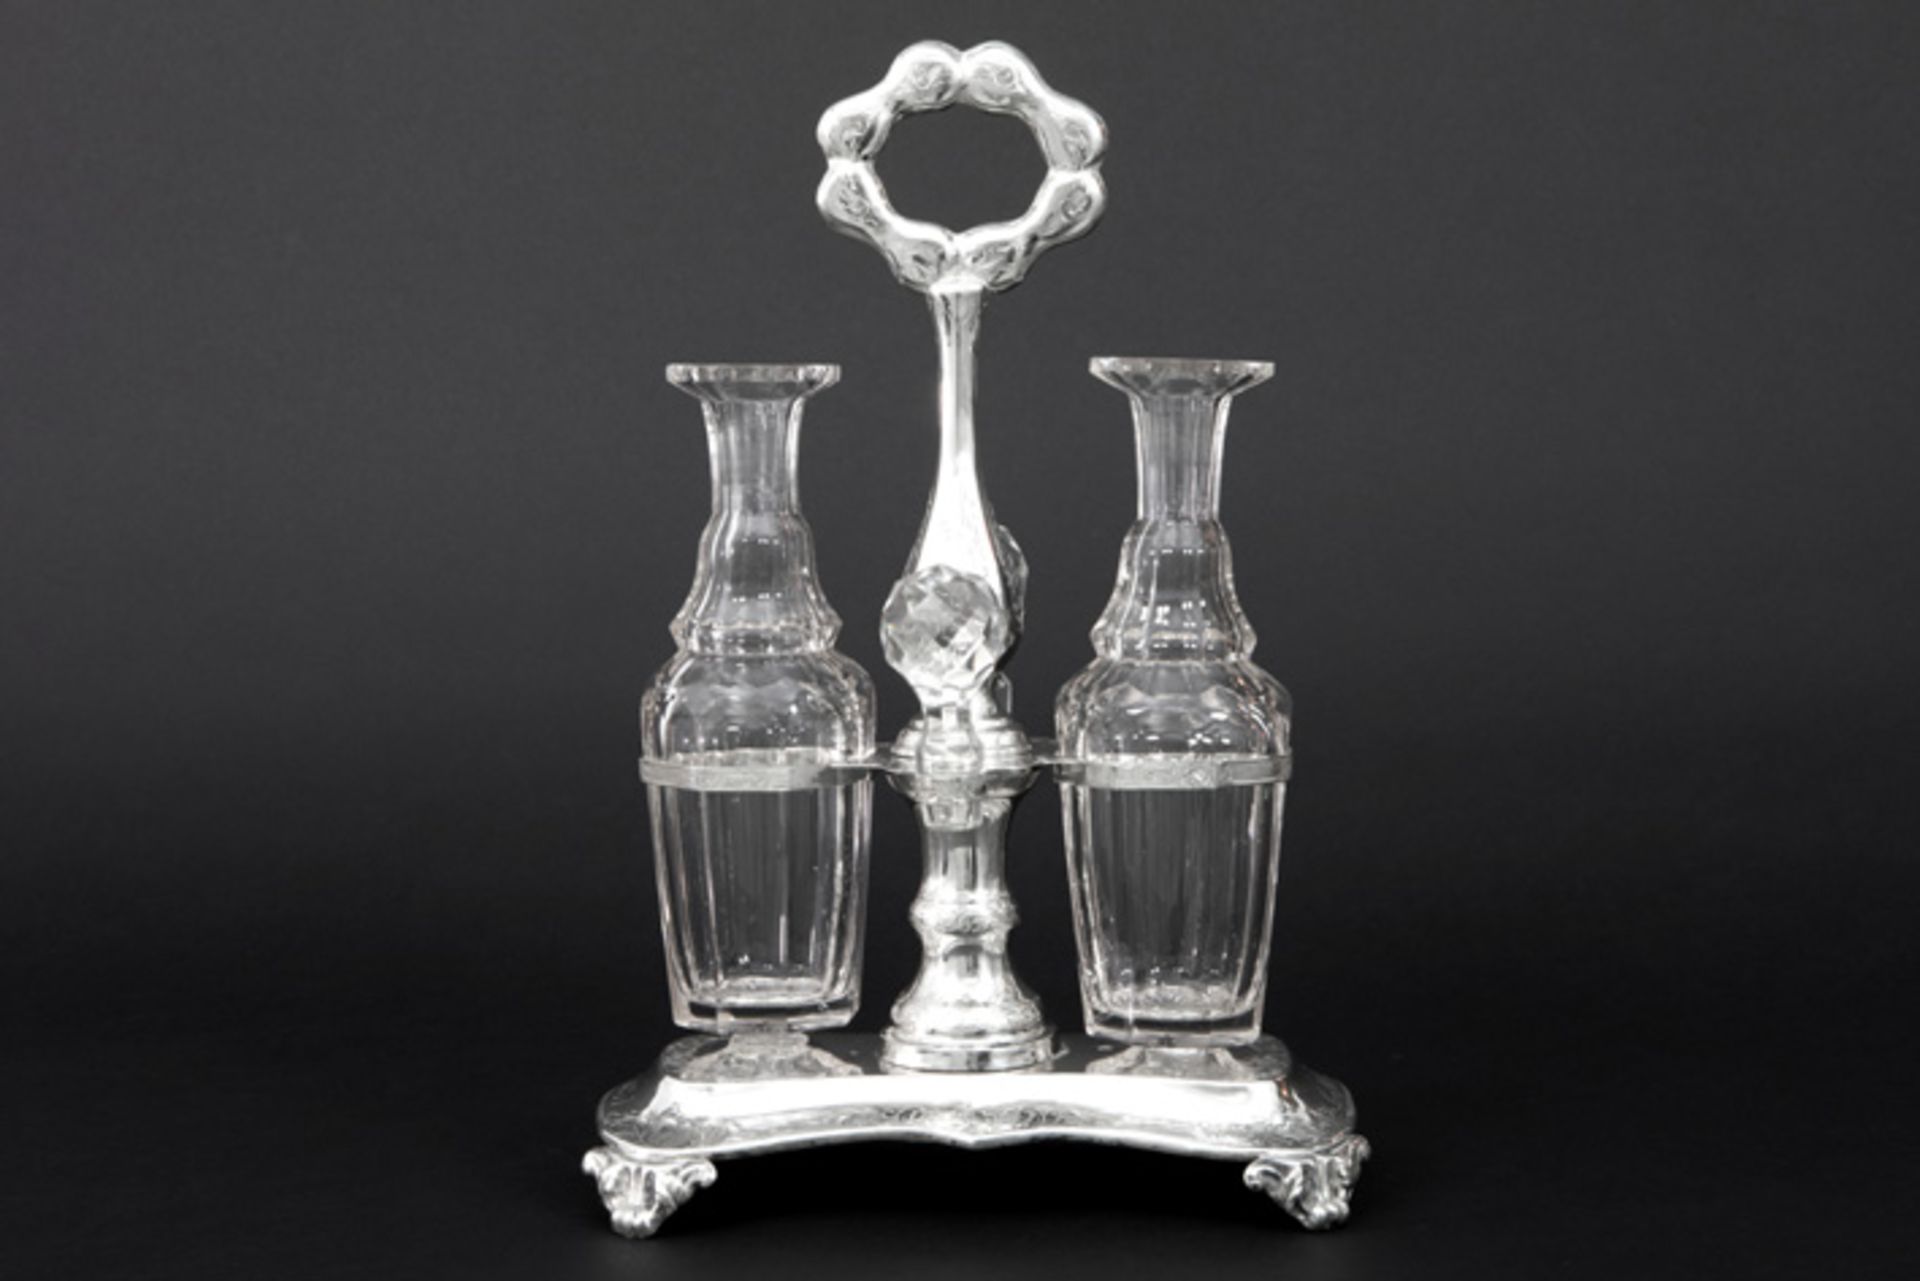 19th Cent. Dutch cruetset in "GMO" marked and 1851 dated silver and with two jugs in crystal|| - Image 3 of 3